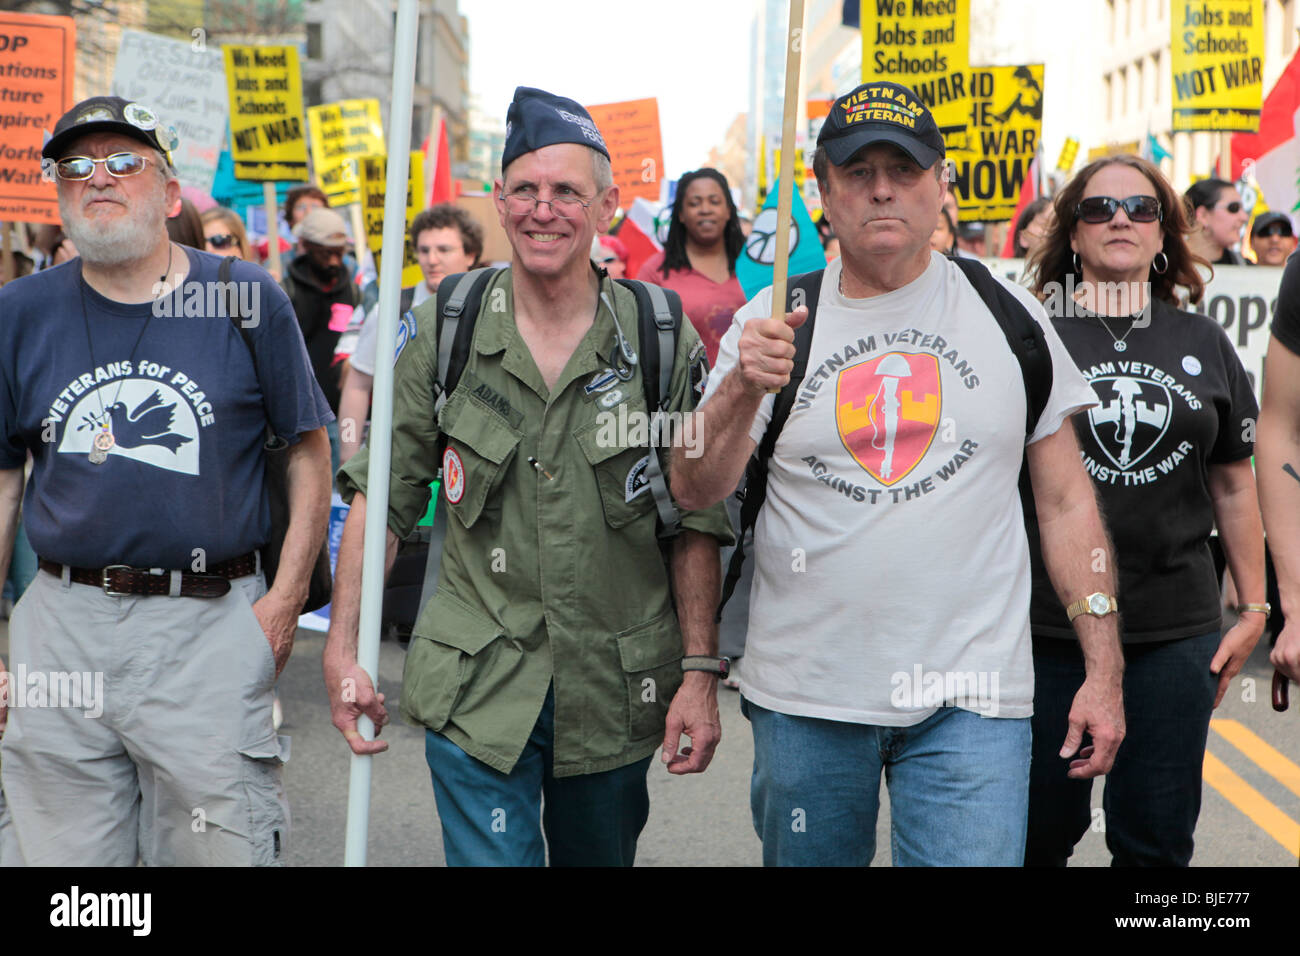 Vietnam Veterans against the war marching Anti-war protest. March On Washington. March 20, 2010 Stock Photo